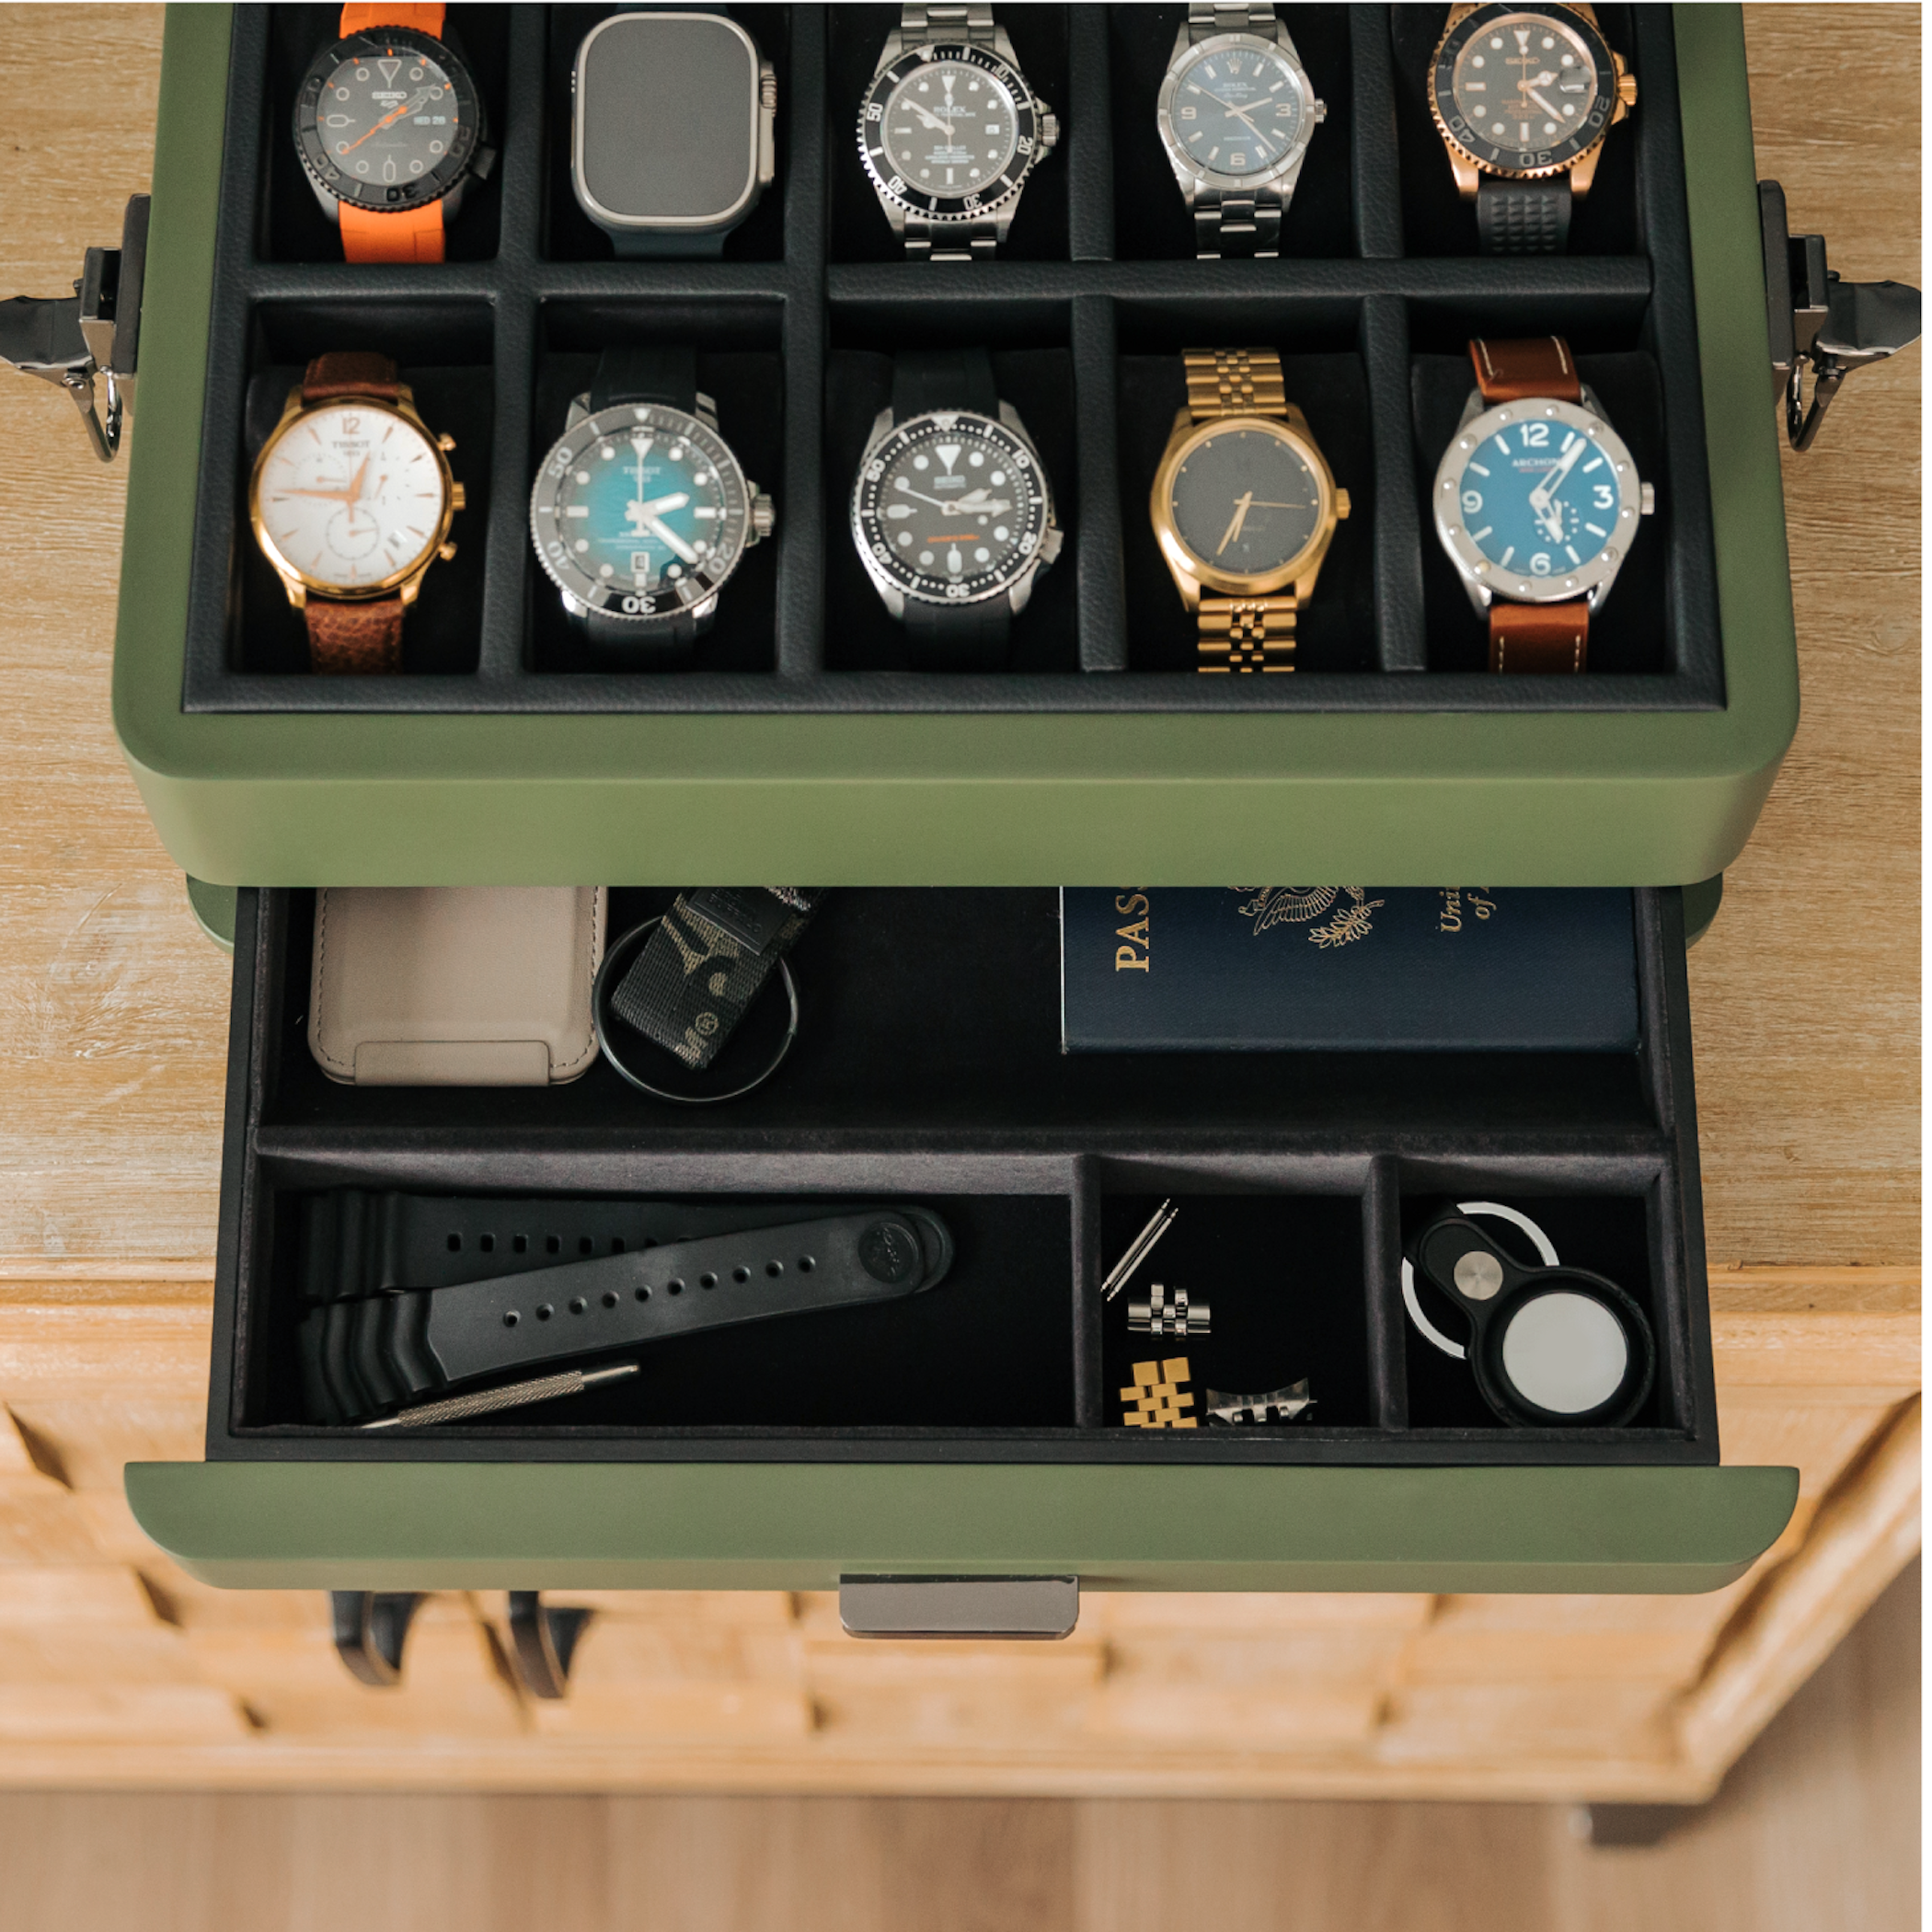 Stylish interior and travel accessory – status-showing watch box for e